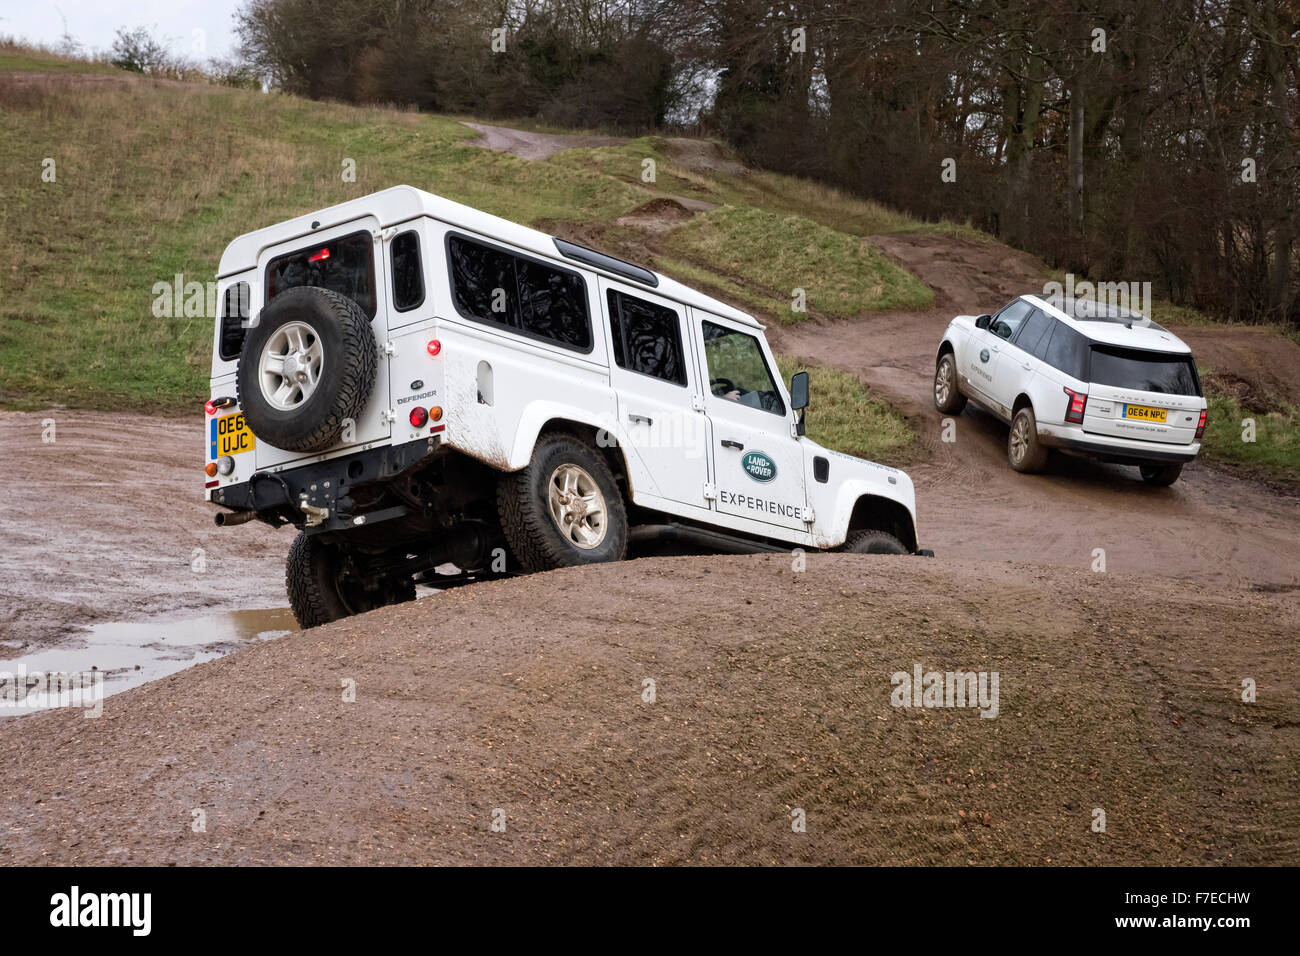 Land Rover Defender 110 and Range Rover off roading on the Land Rover Experience driving coarse Luton Hoo Bedfordshire UK Stock Photo